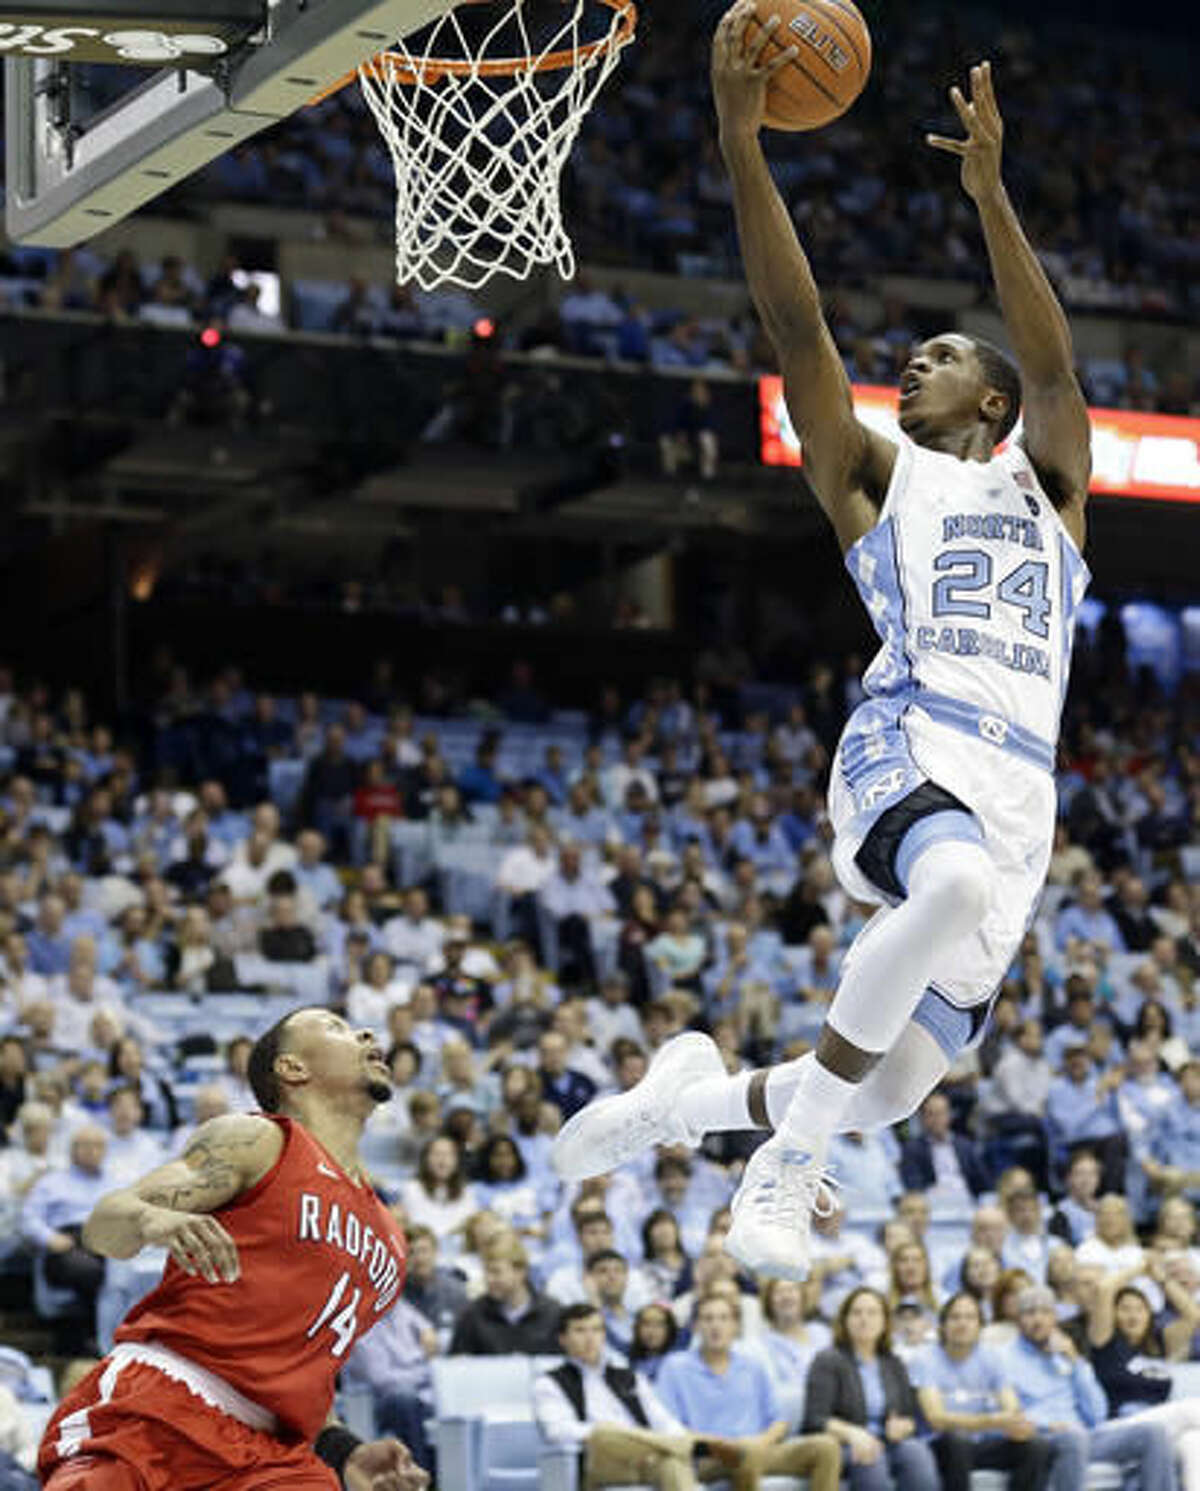 North Carolina's Kenny Williams (24) drives to the basket as Radford's Justin Cousin (14) defends during the first half of an NCAA college basketball game in Chapel Hill, N.C., Sunday, Dec. 4, 2016. (AP Photo/Gerry Broome)